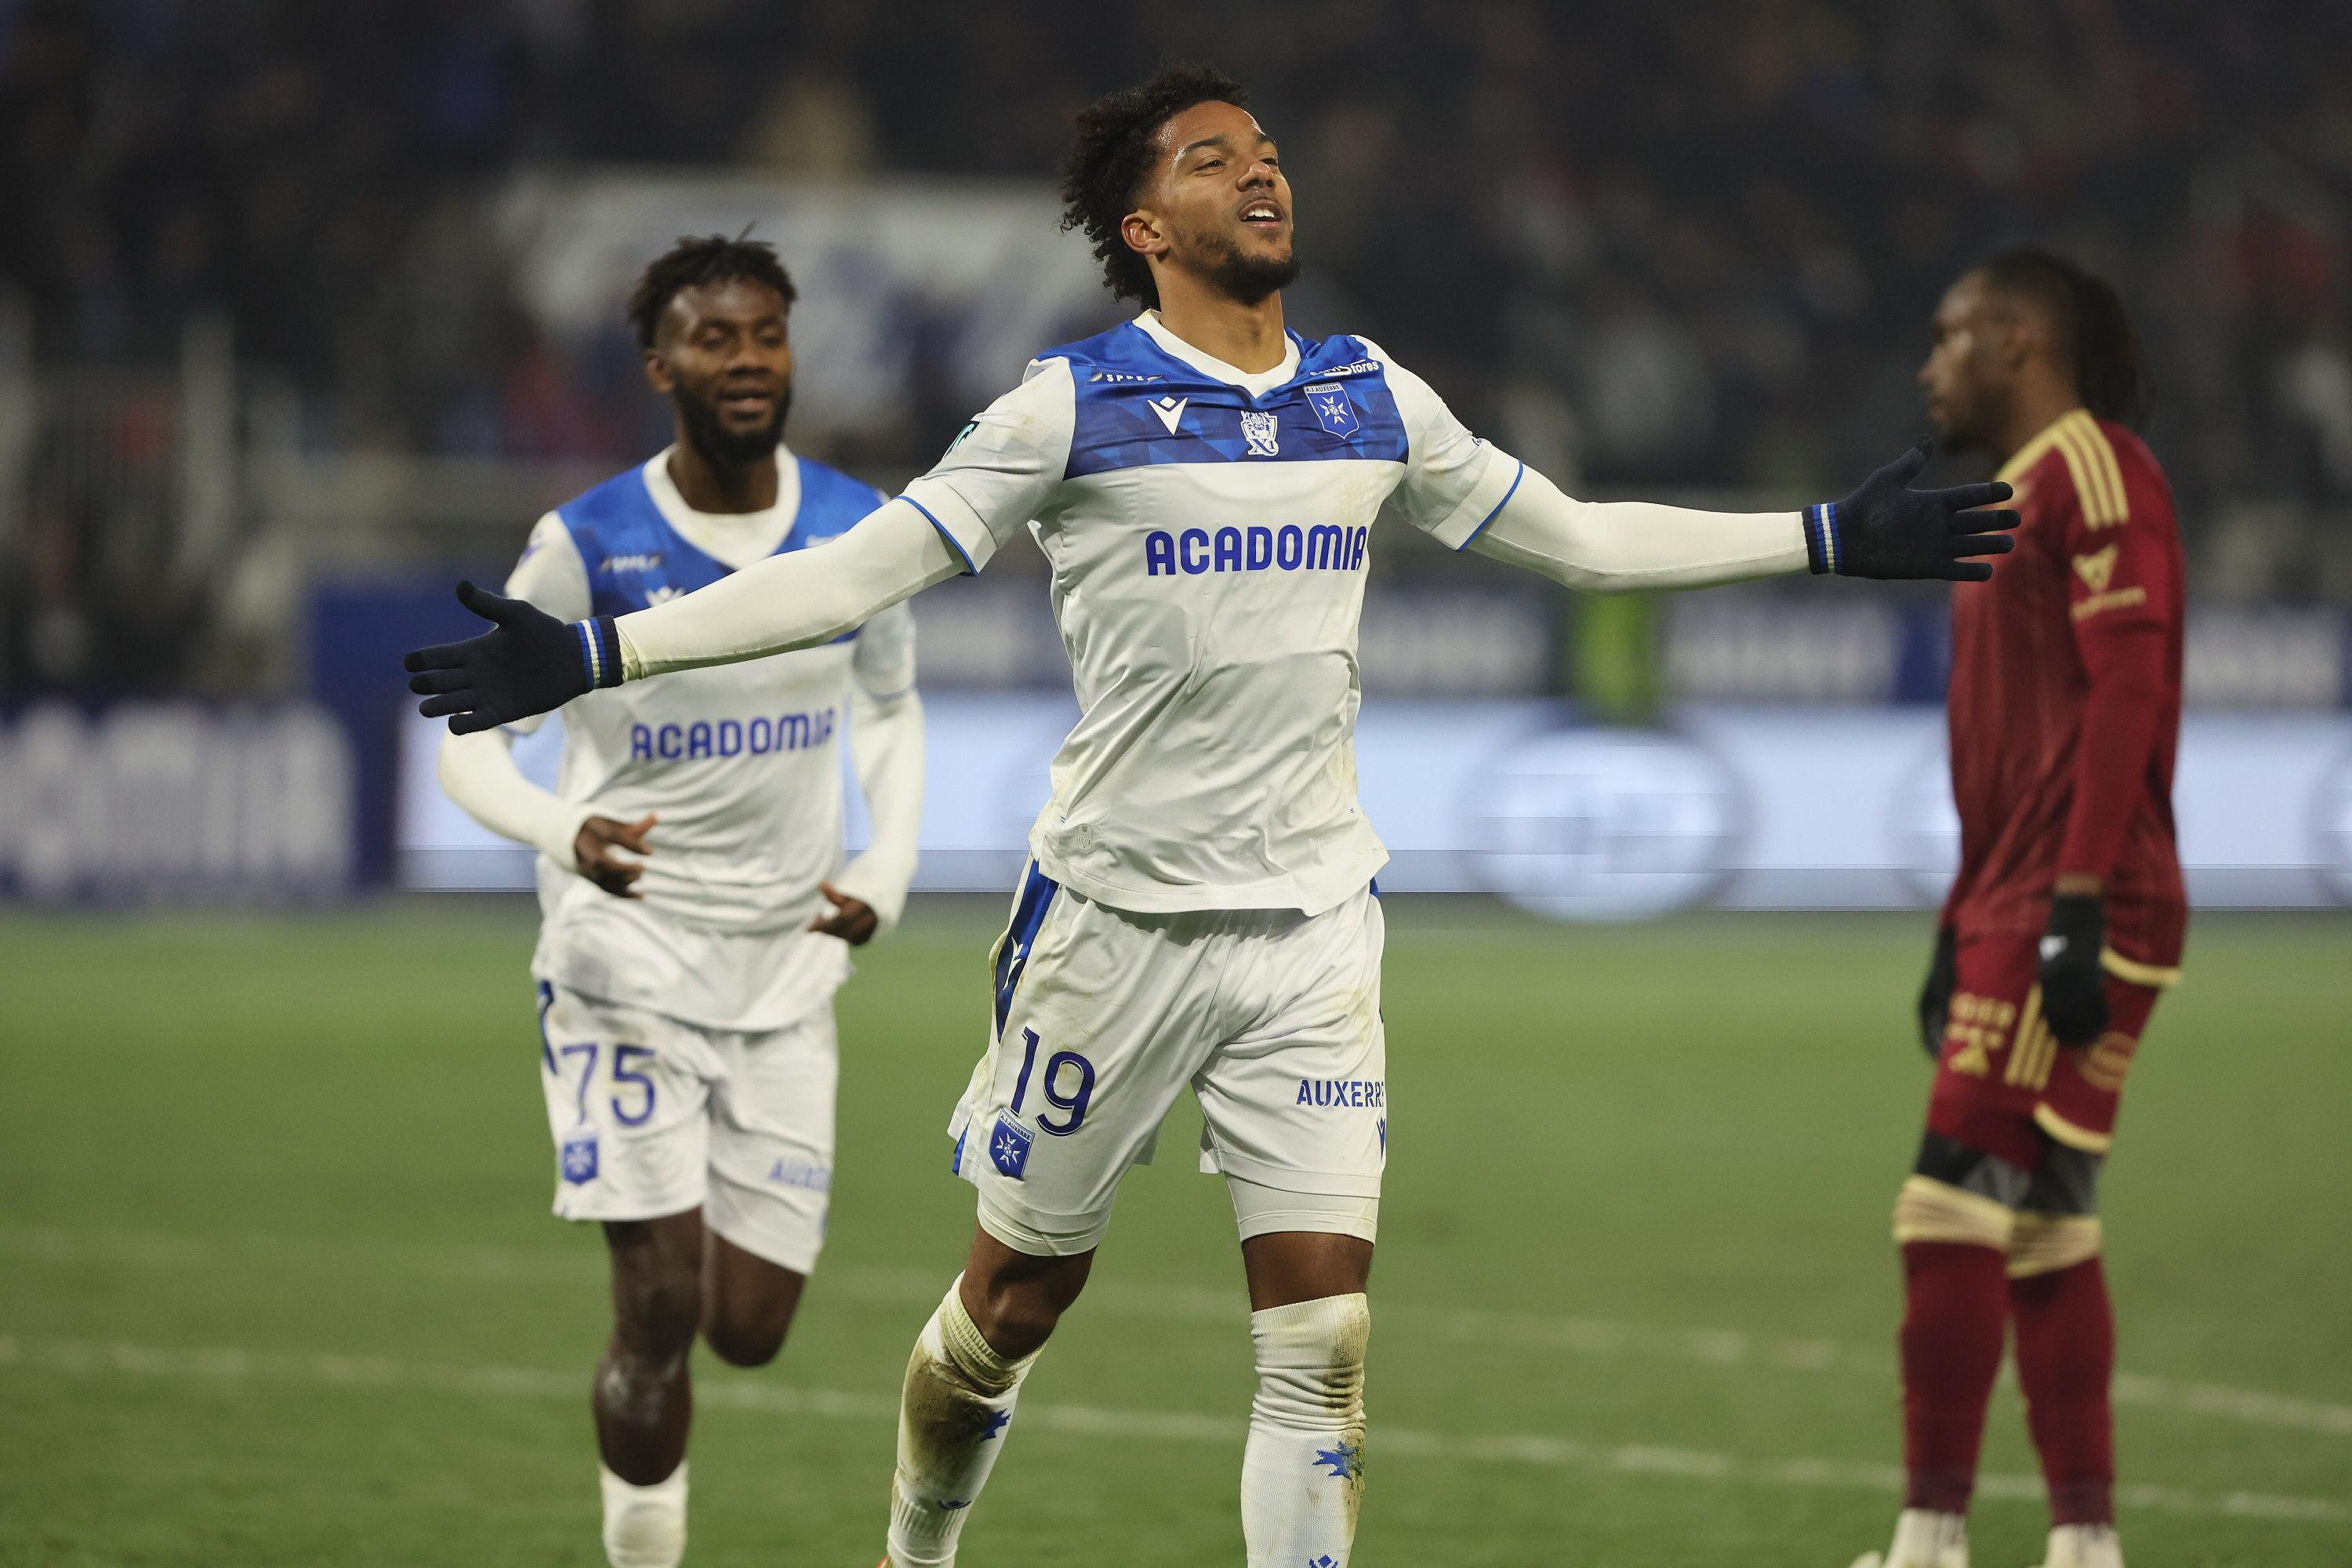 Ligue 2: Auxerre disposes of Bordeaux and takes the lead in the ranking